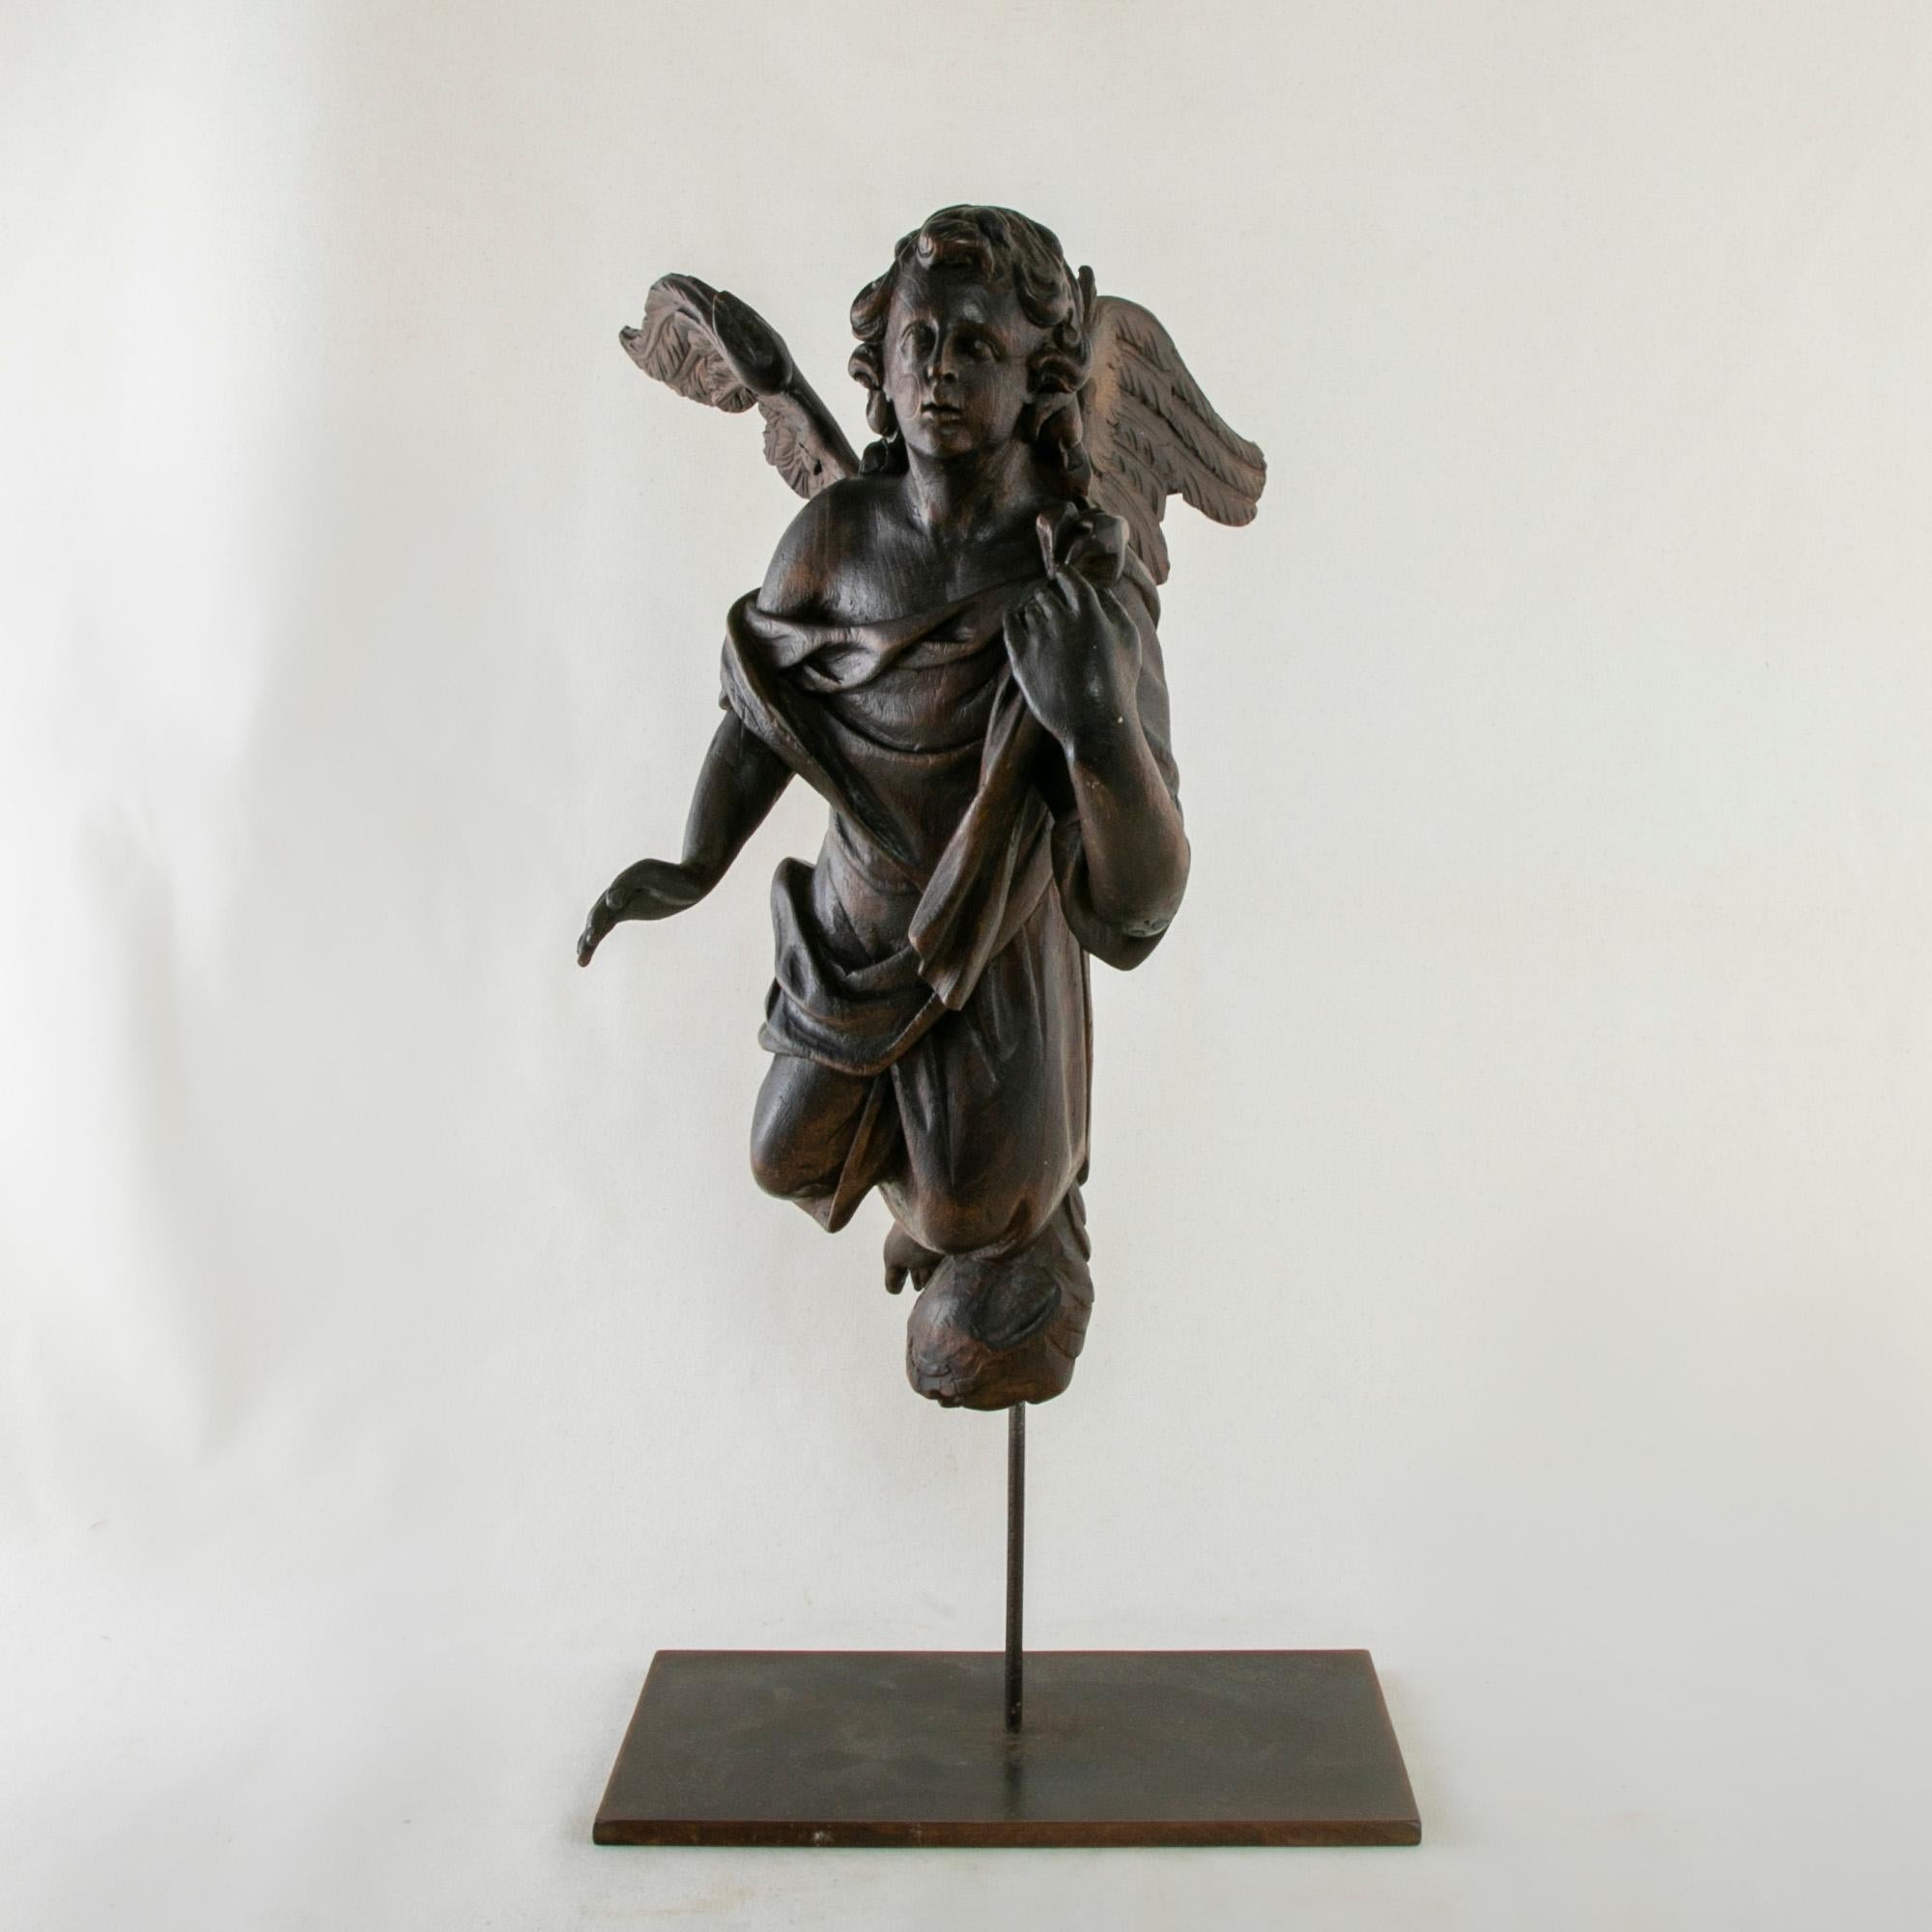 This hand carved angel sculpture from the late eighteenth century has wings outstretched as if in mid-flight. His left arm reaches up to his shoulder towards the cloth draped around him. Suspended from eyelets on his back, this sculpture is mounted